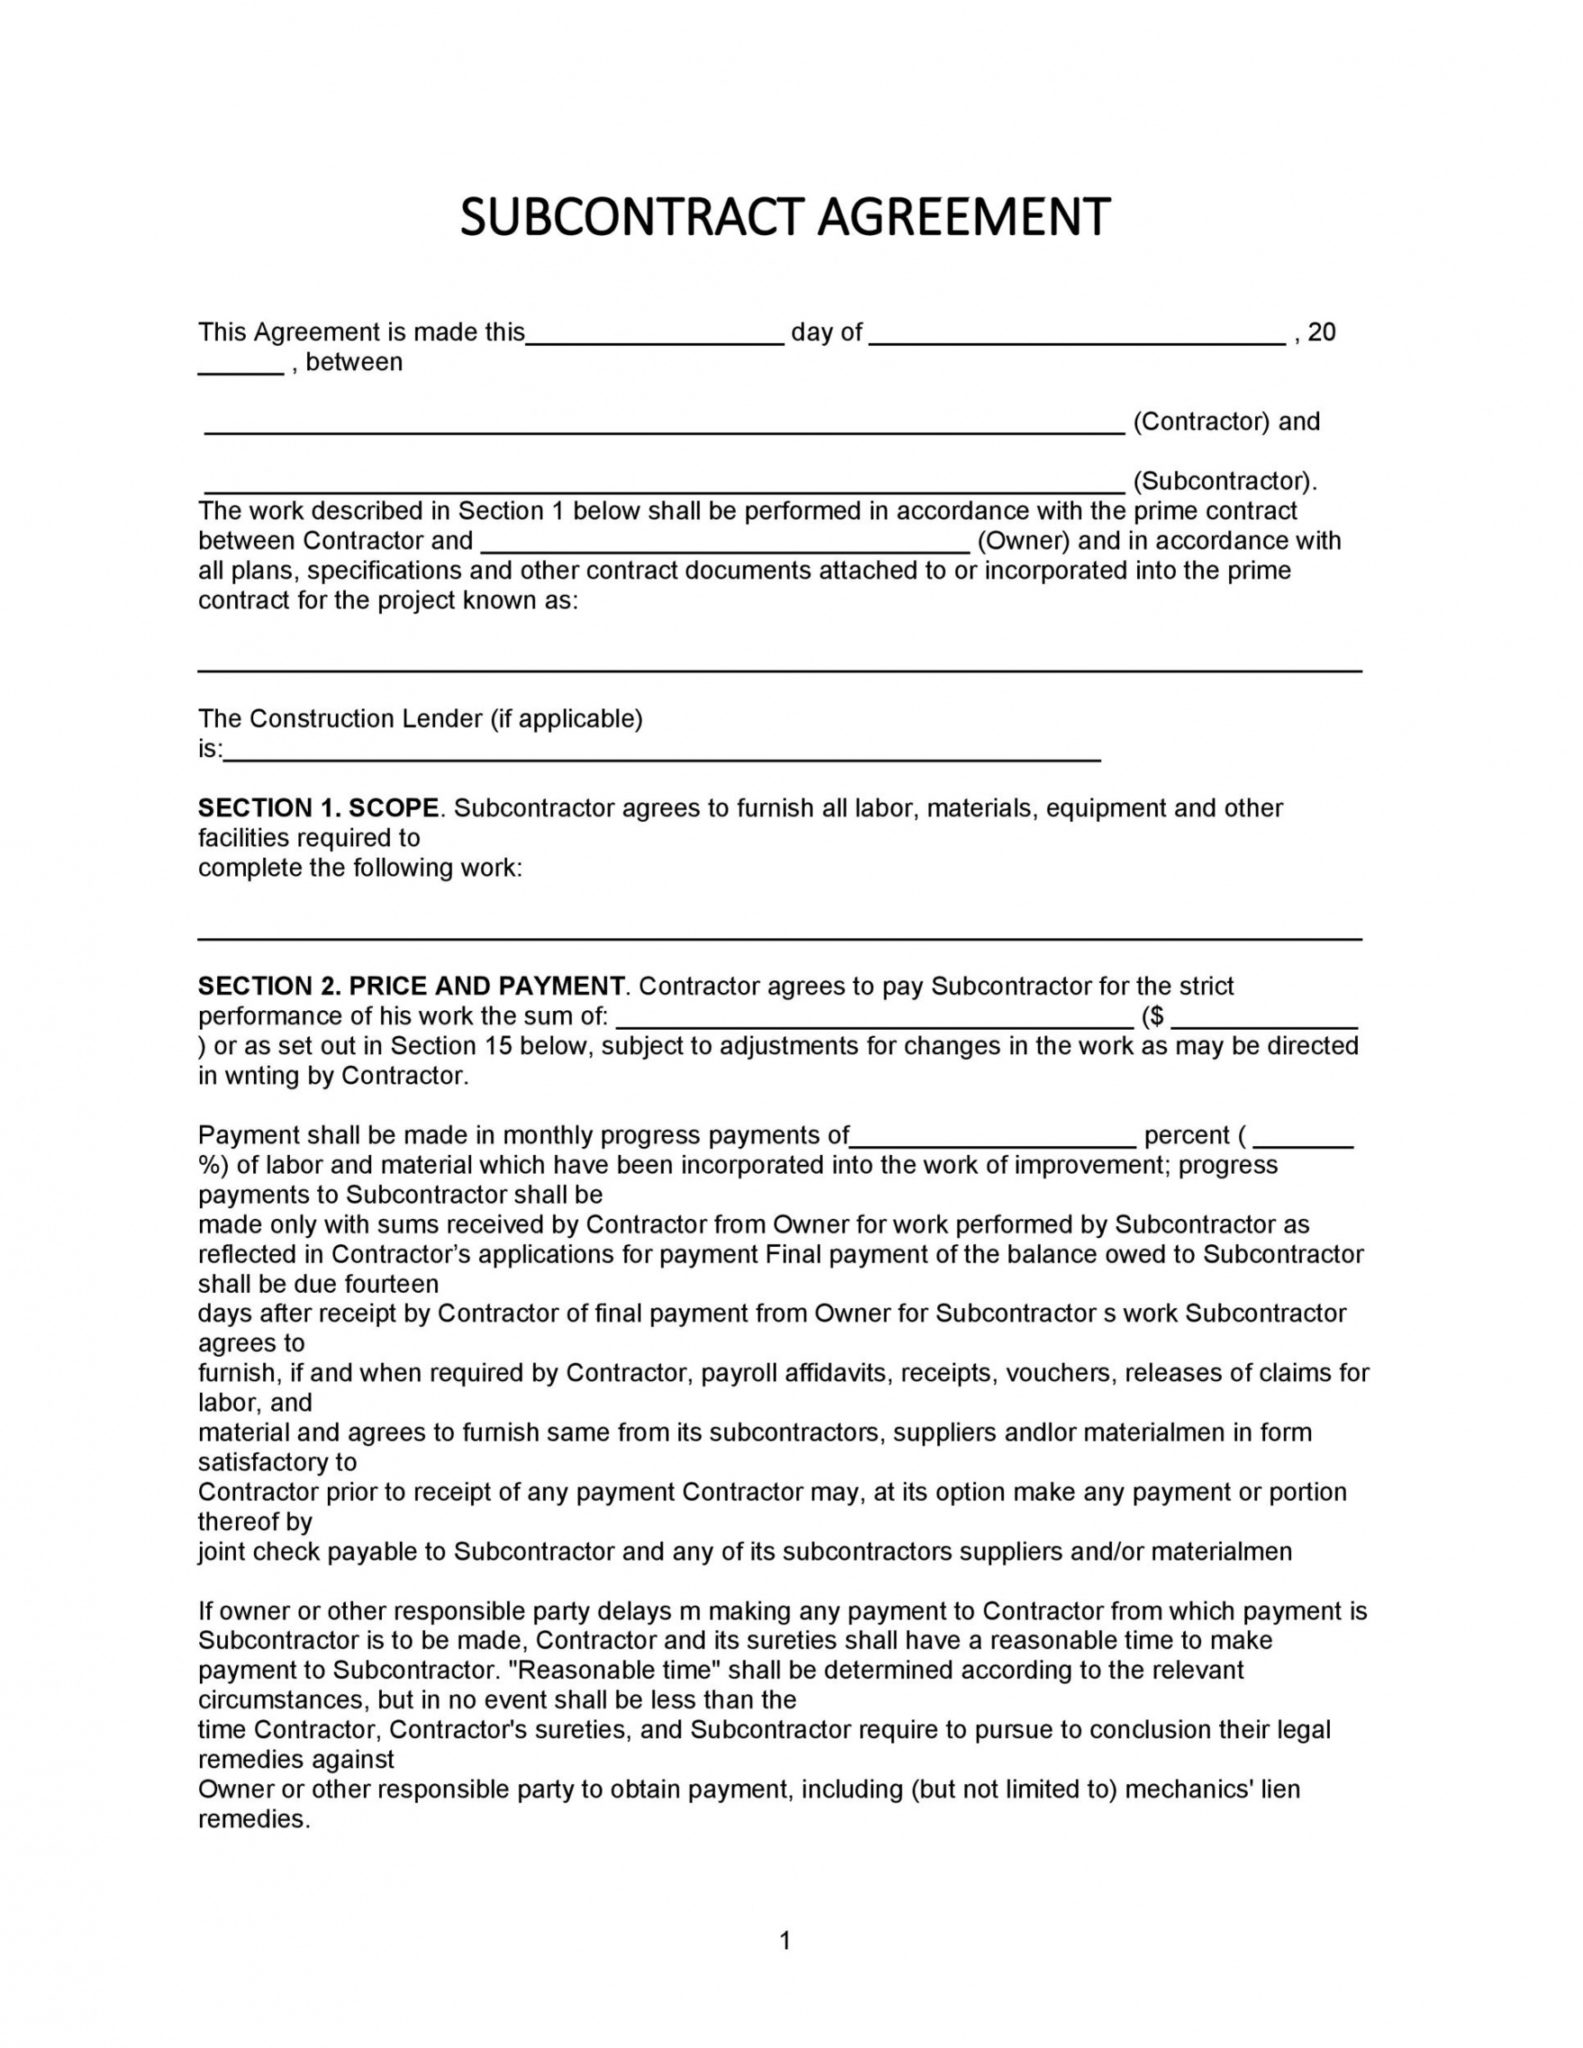 sample-construction-contract-template-agreement-approveme